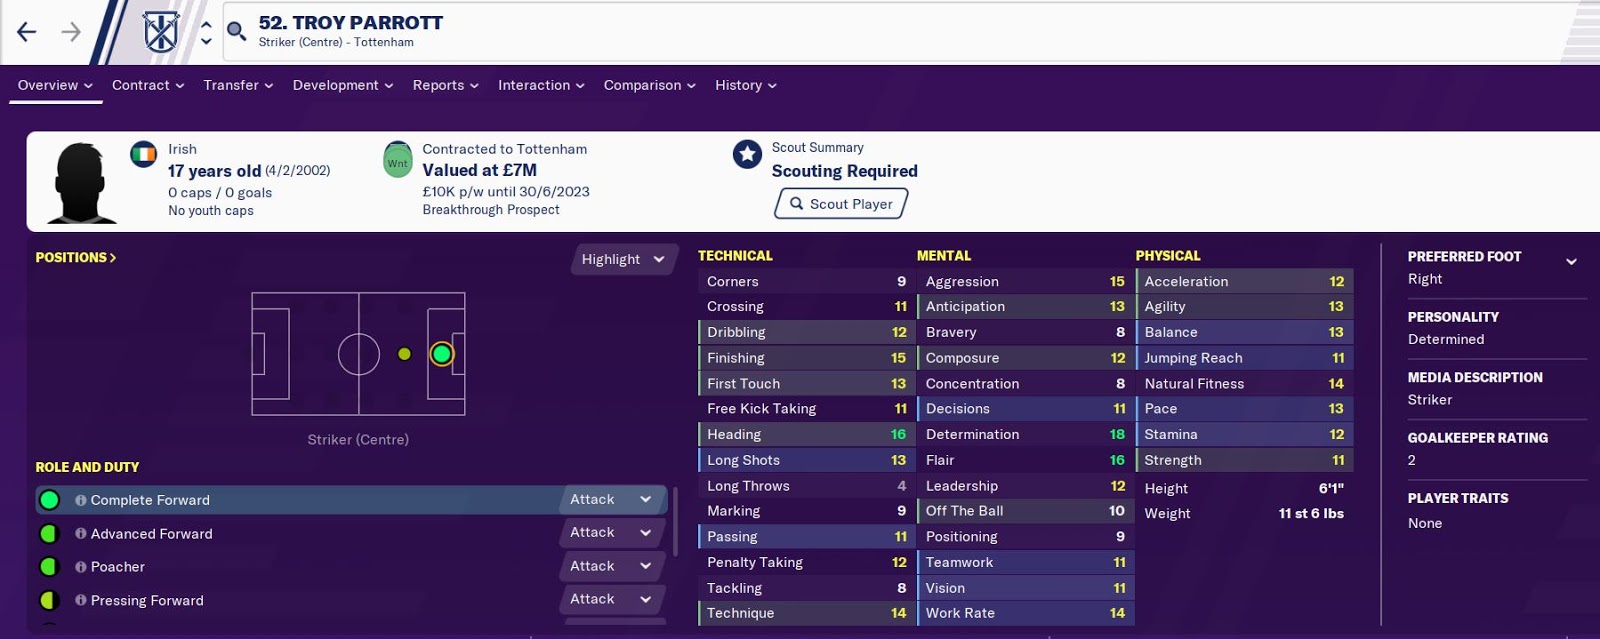 Football Manager 2020 "width =" 916 "height =" 365